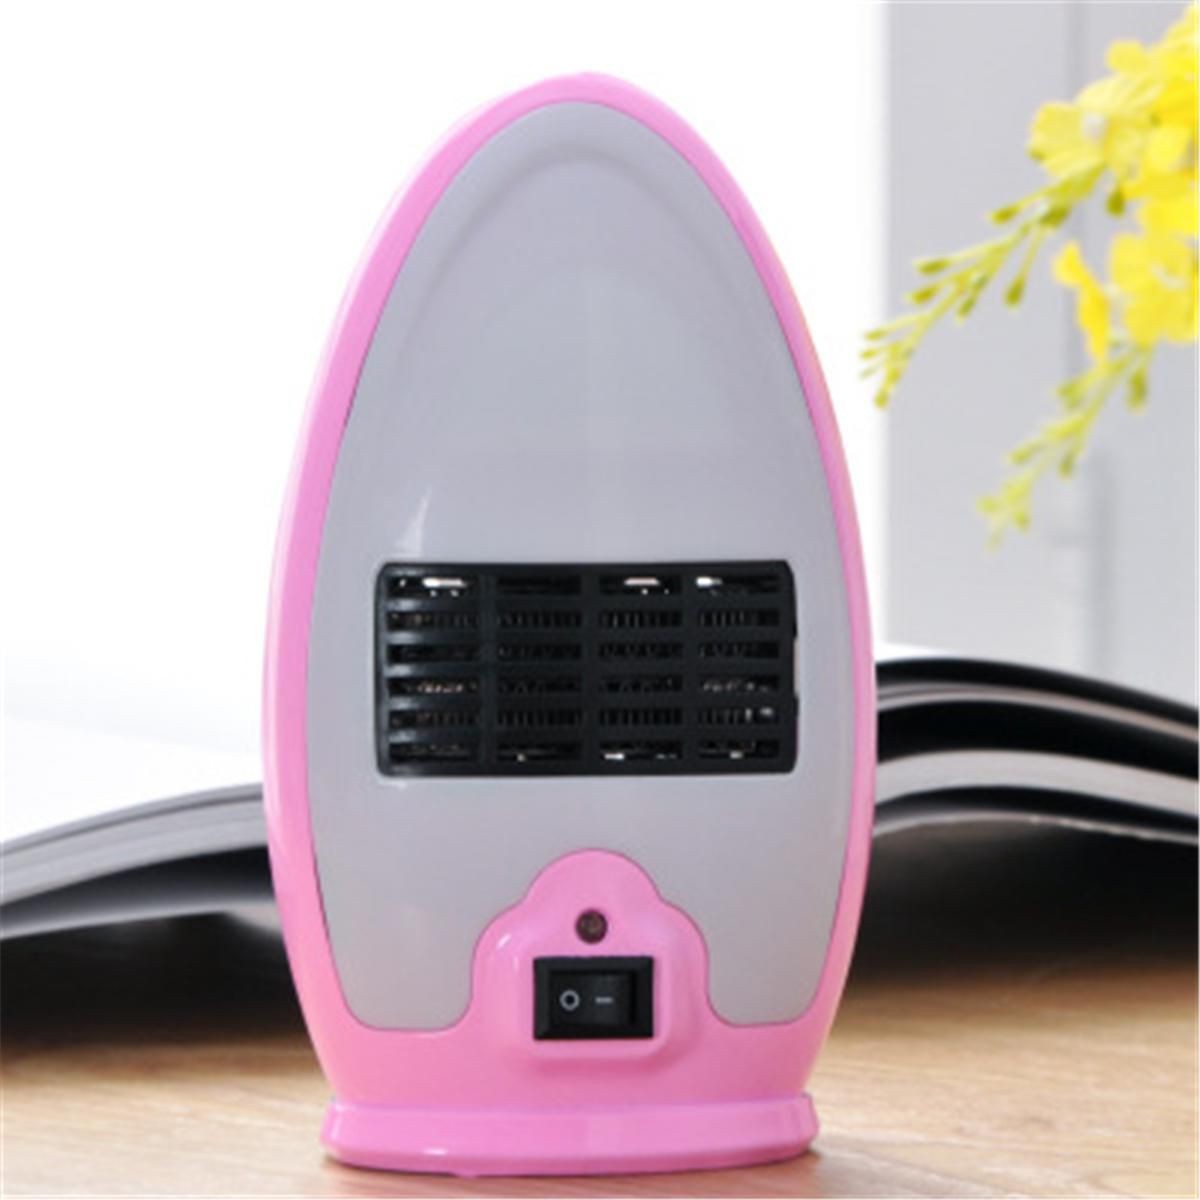 Infrared Fireplace Heater Awesome Electric Mini Heater Warmer Fan Portable Silent Home Fice Desktop Fireplace